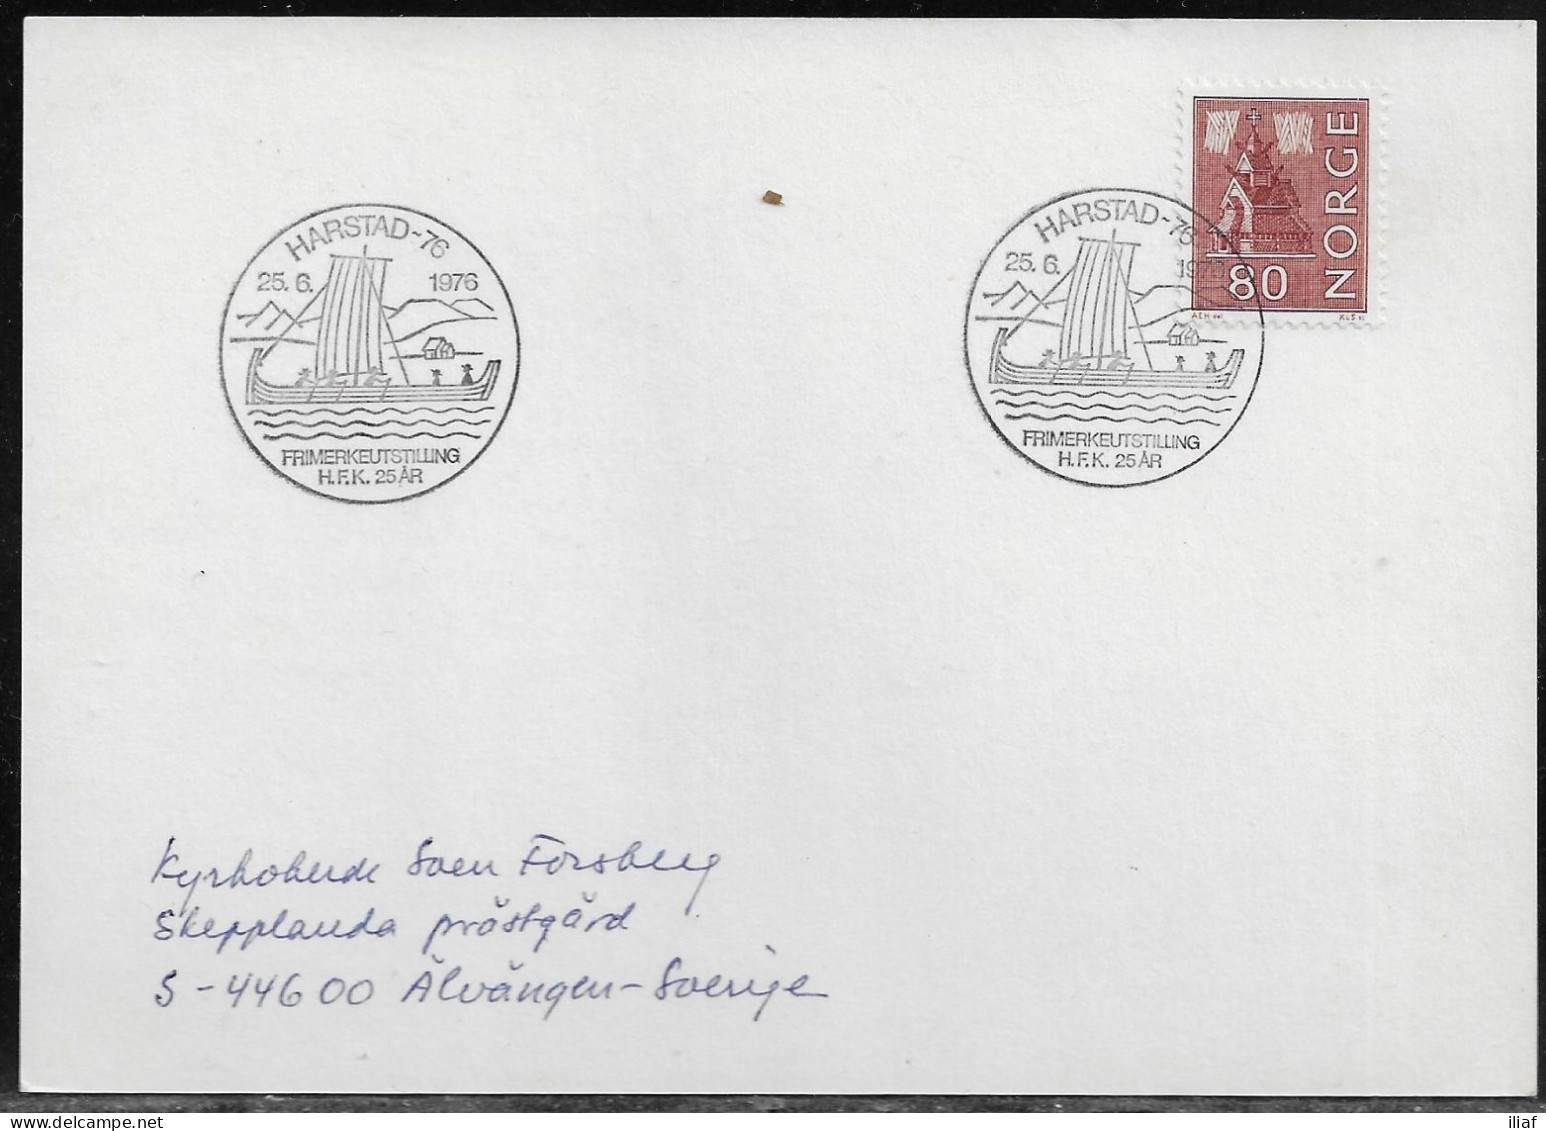 Norway.   HARSTAD-76, STAMP EXHIBITION, H.F.K. 25 YEARS.   Norway Special Event Postmark. - Covers & Documents